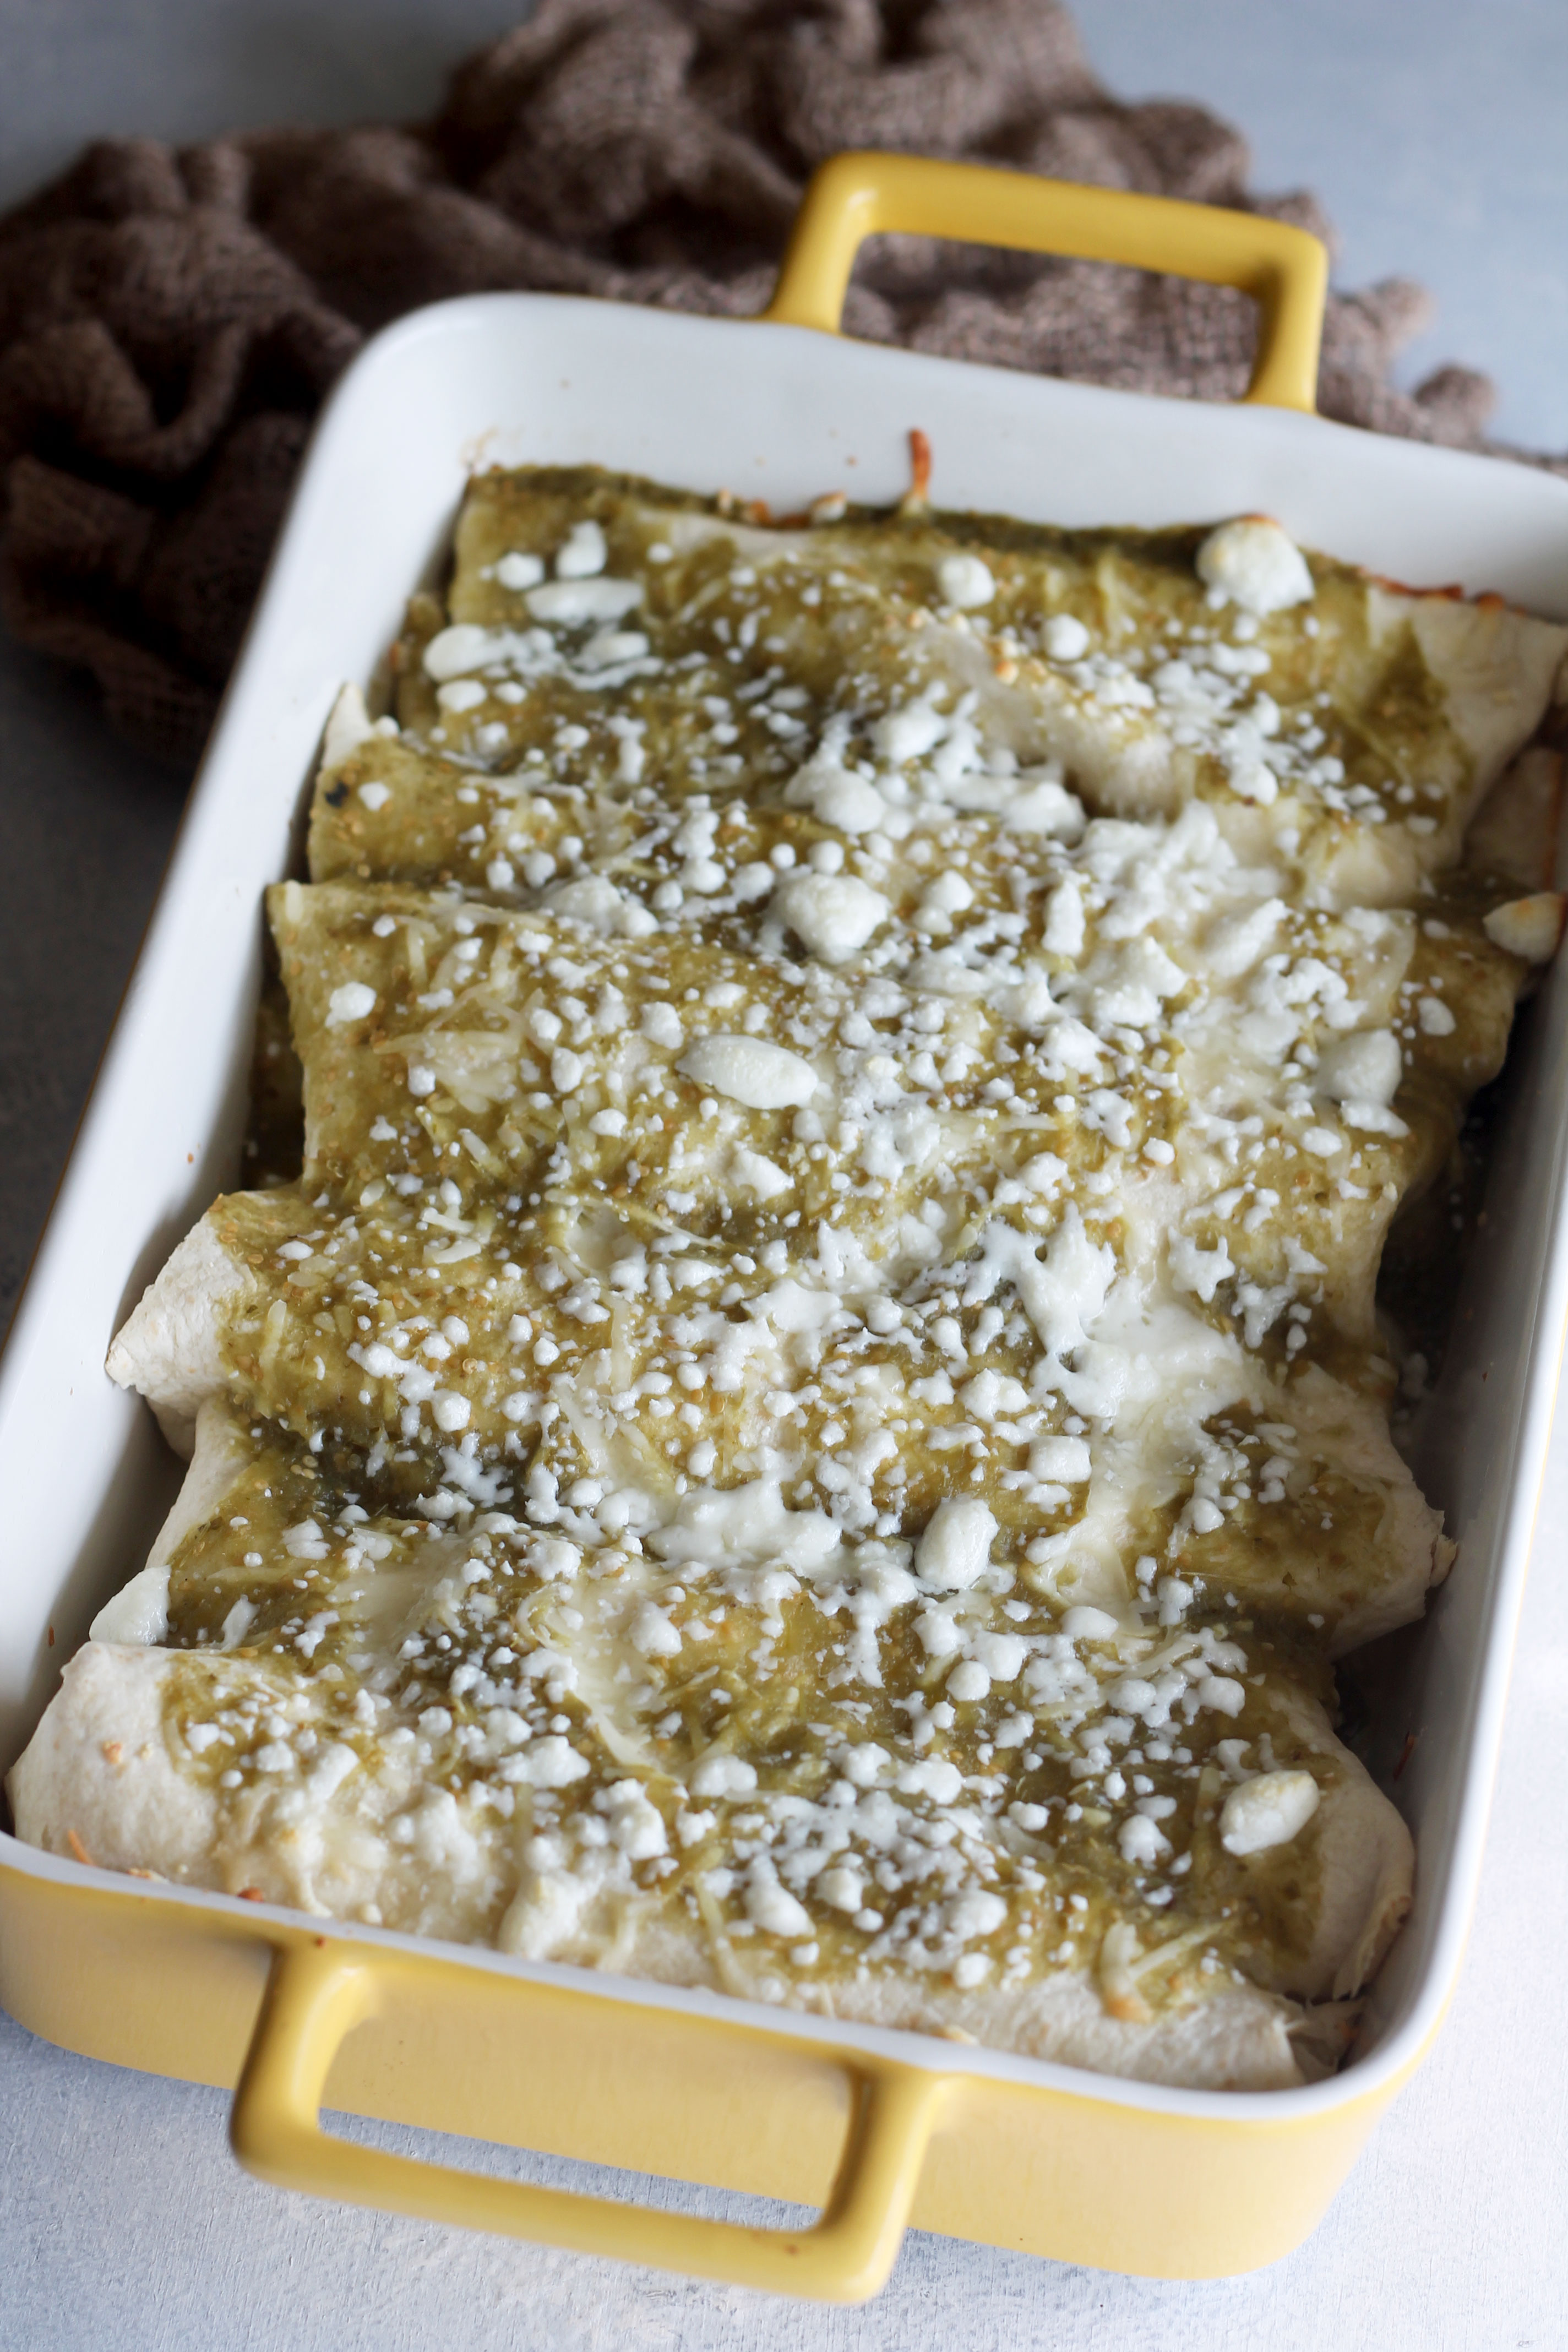 Skip going out to eat and stay in tonight to make these Creamy Chicken Enchiladas